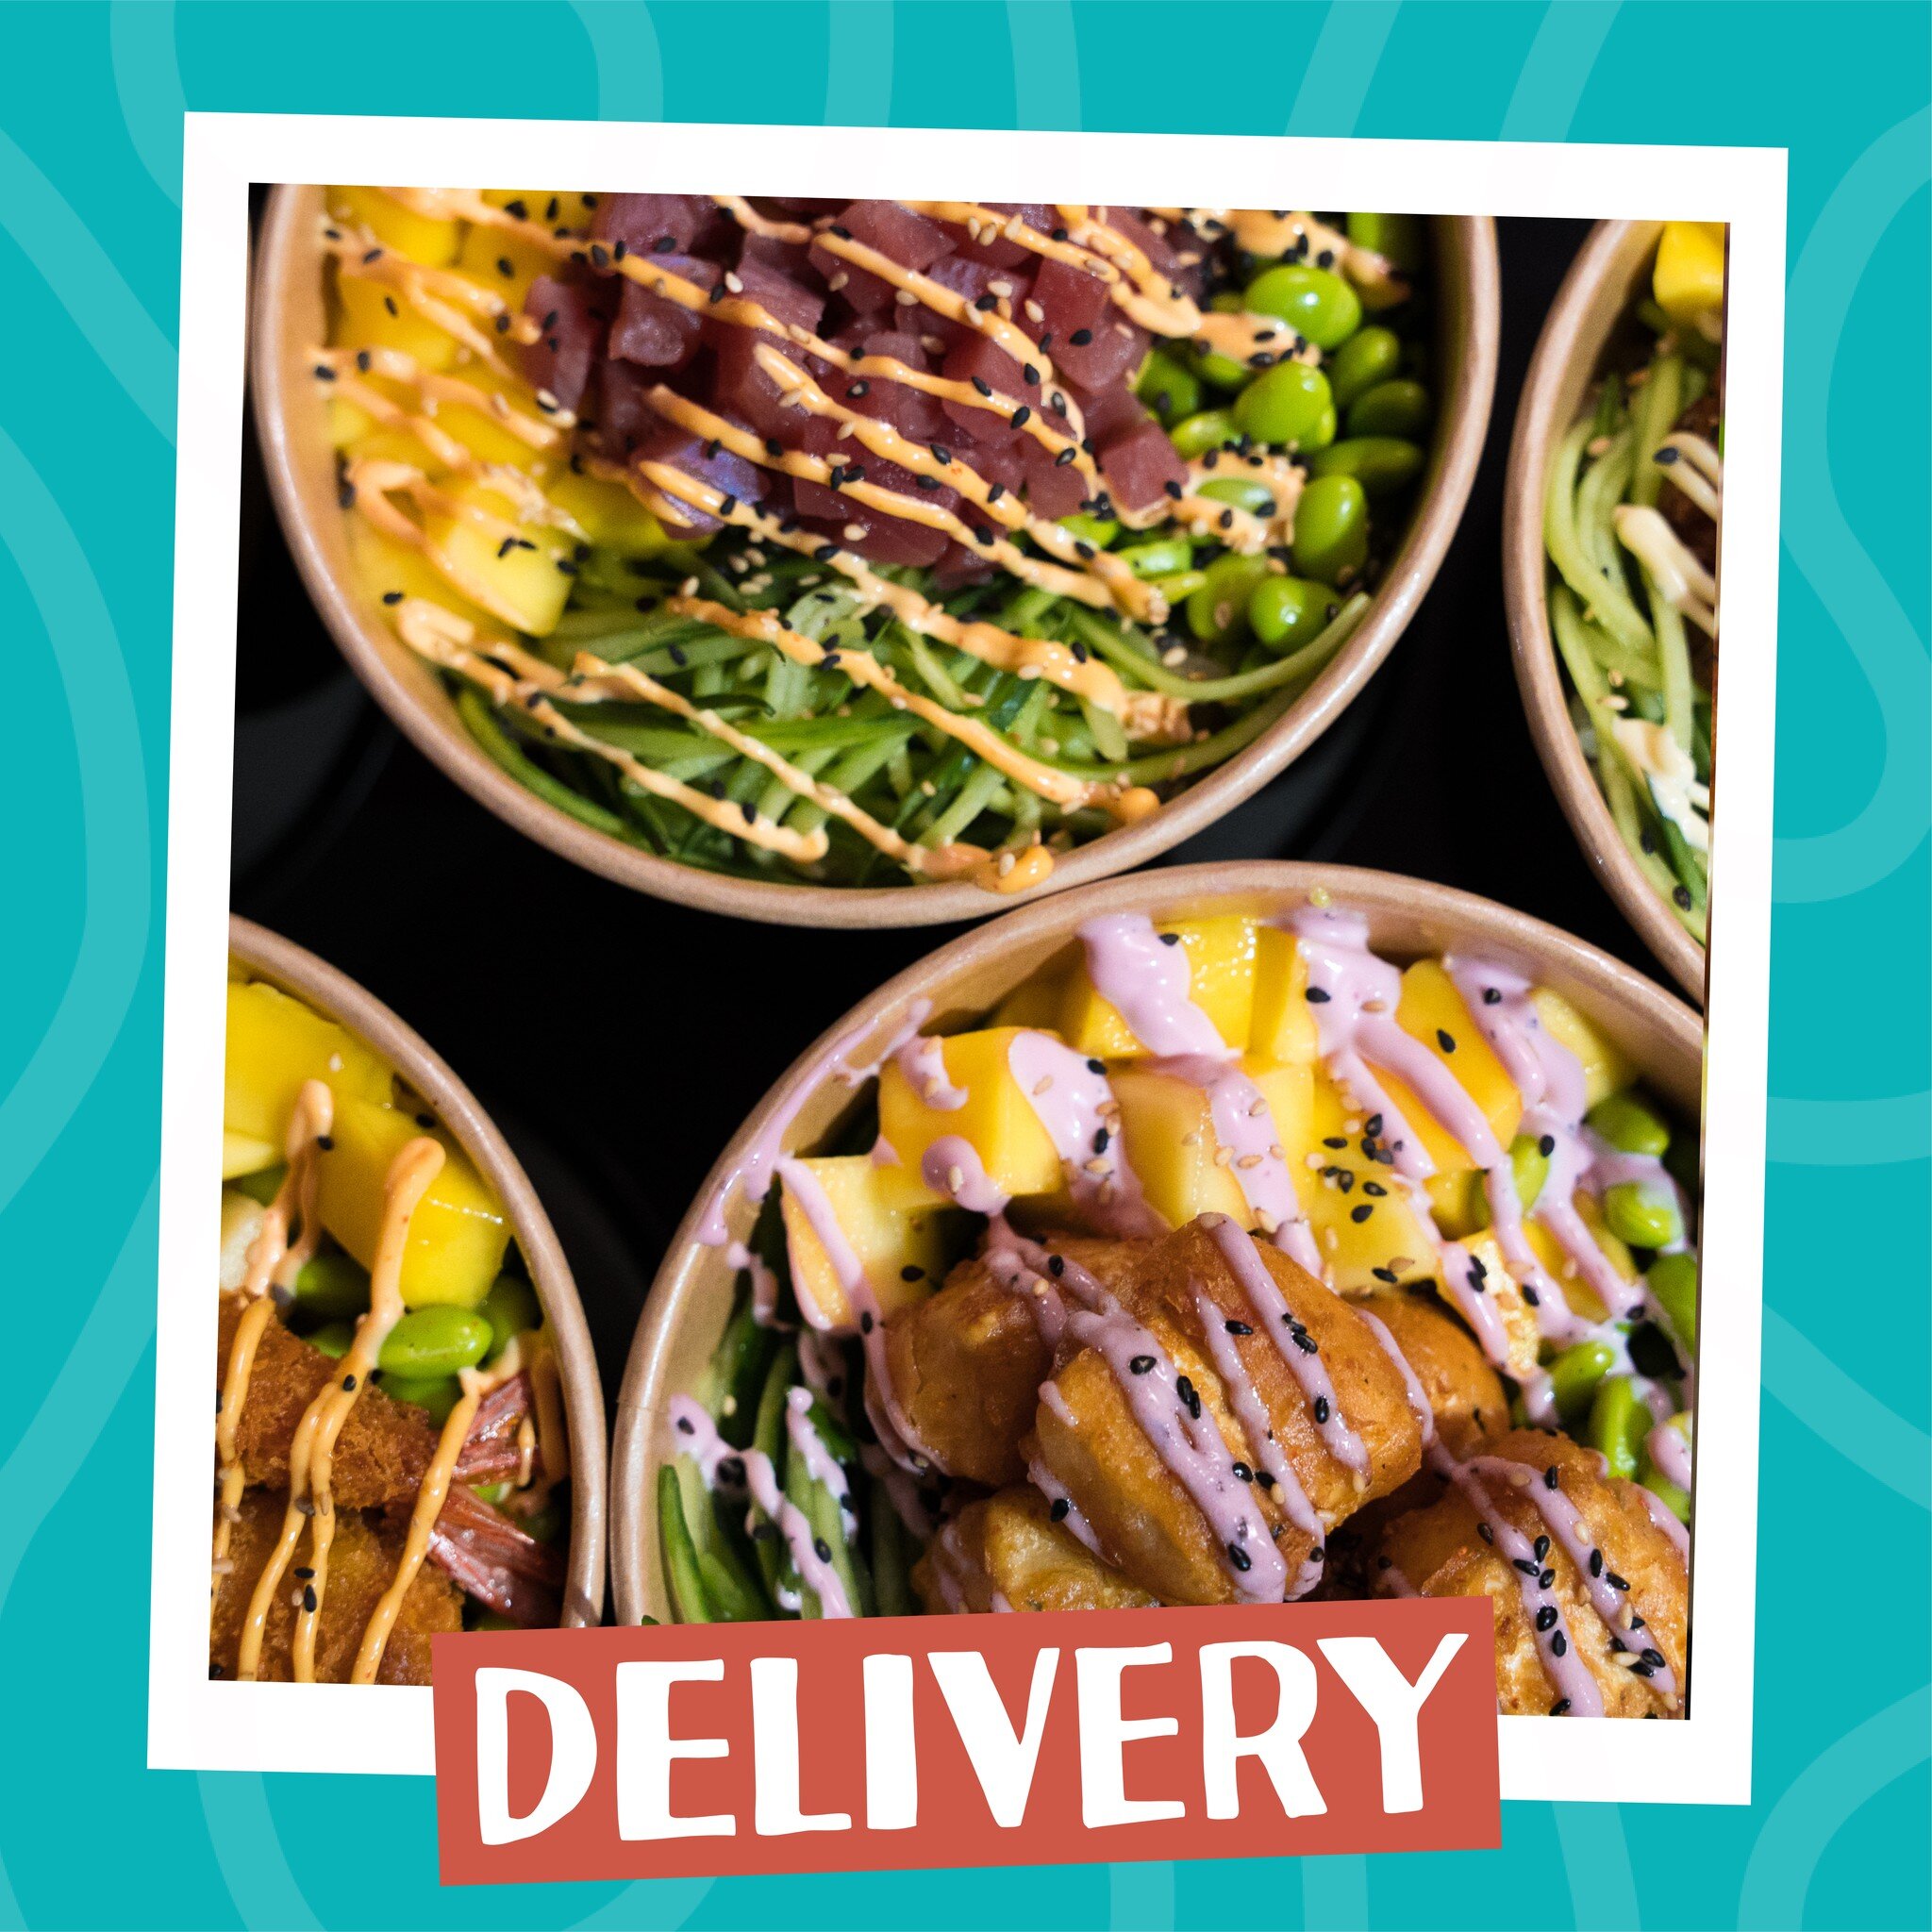 Why settle for boring food when you can have a taste of paradise? 🌴 Let Pok&eacute;licious transport your taste buds to the sunny beaches of Hawaii, with our mouthwatering Poke Bowls..🧡Order now via the link in bio or drop by for take away. 

#Poke